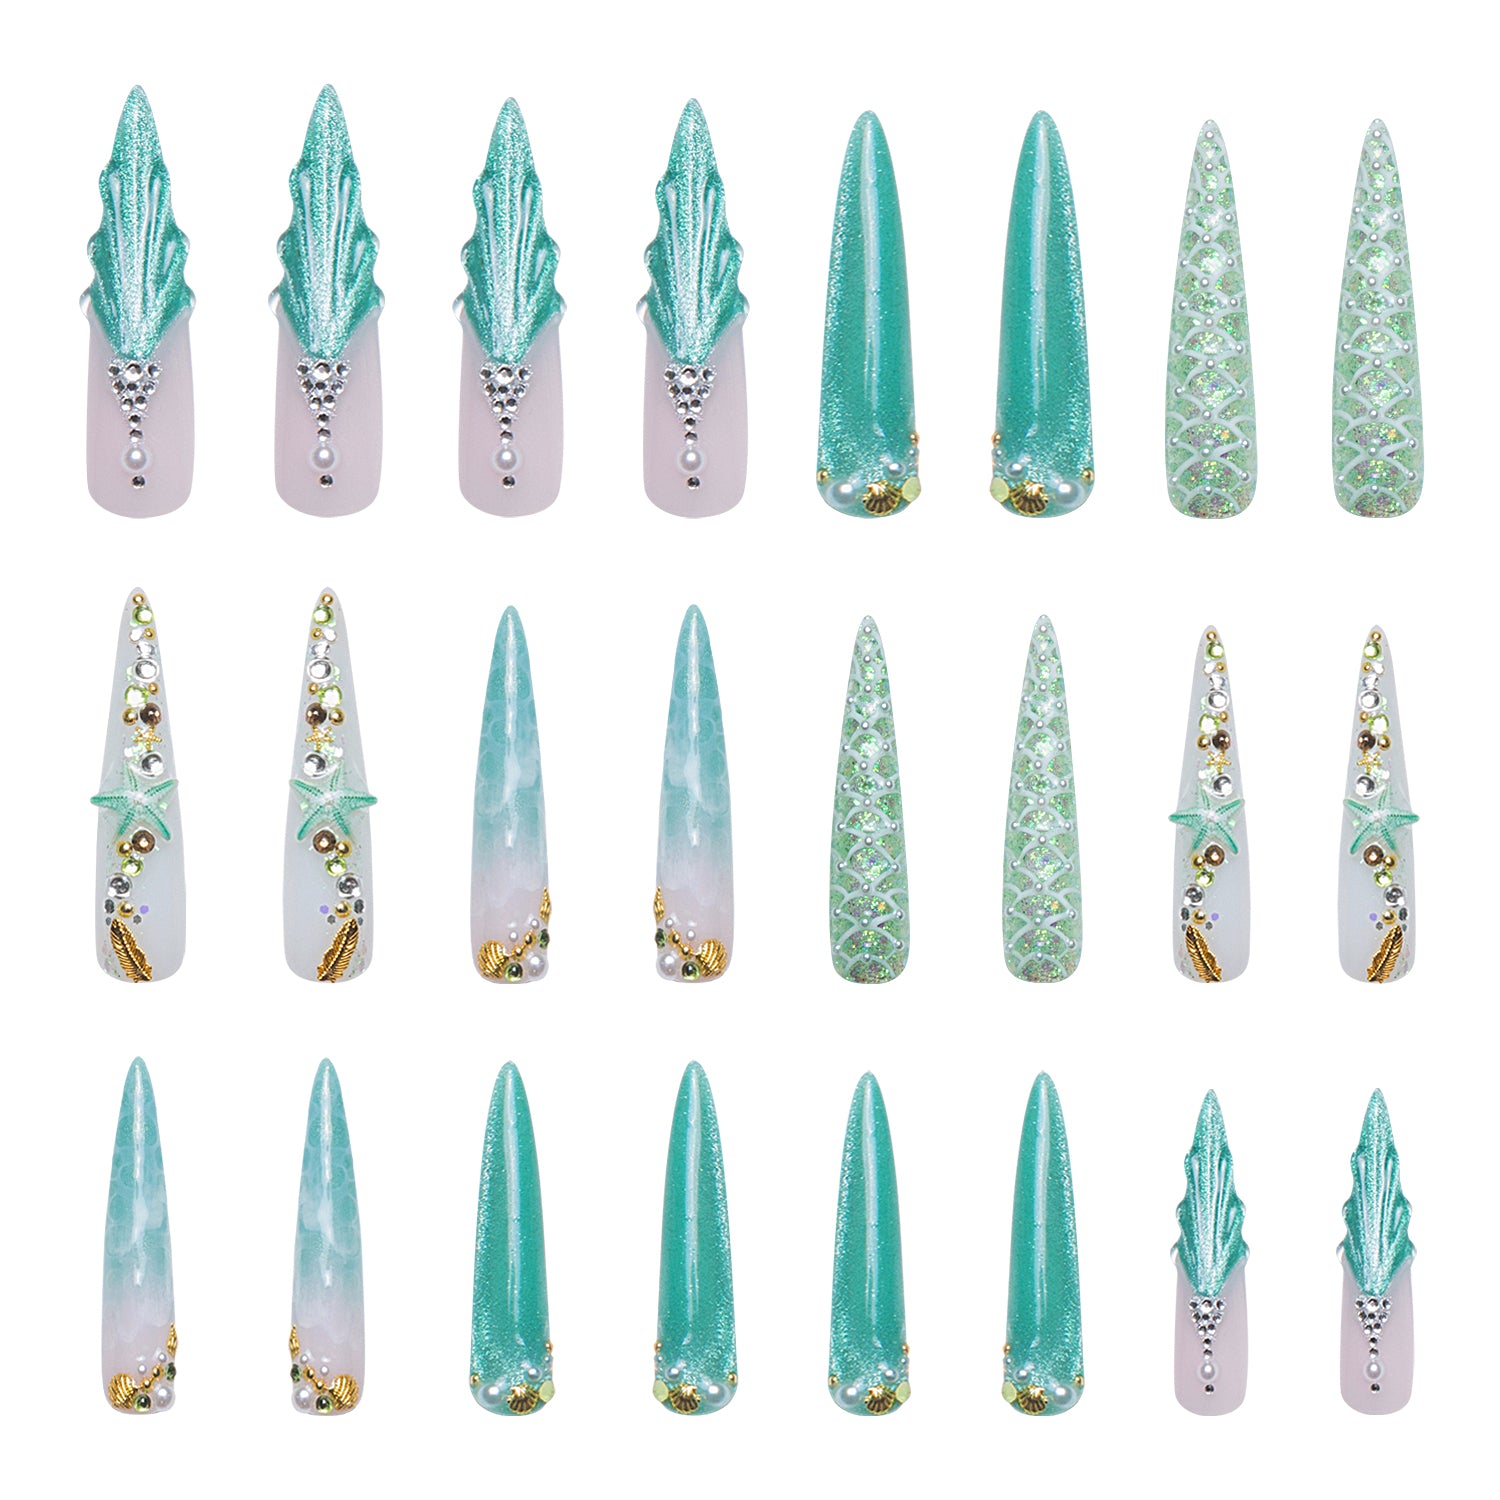 24 Pcs Press on Nails from the Surfing Girls collection, showcasing designs with Hawaii sea blue base, starfish, glitters, and beach vibes. Available for ready to ship.